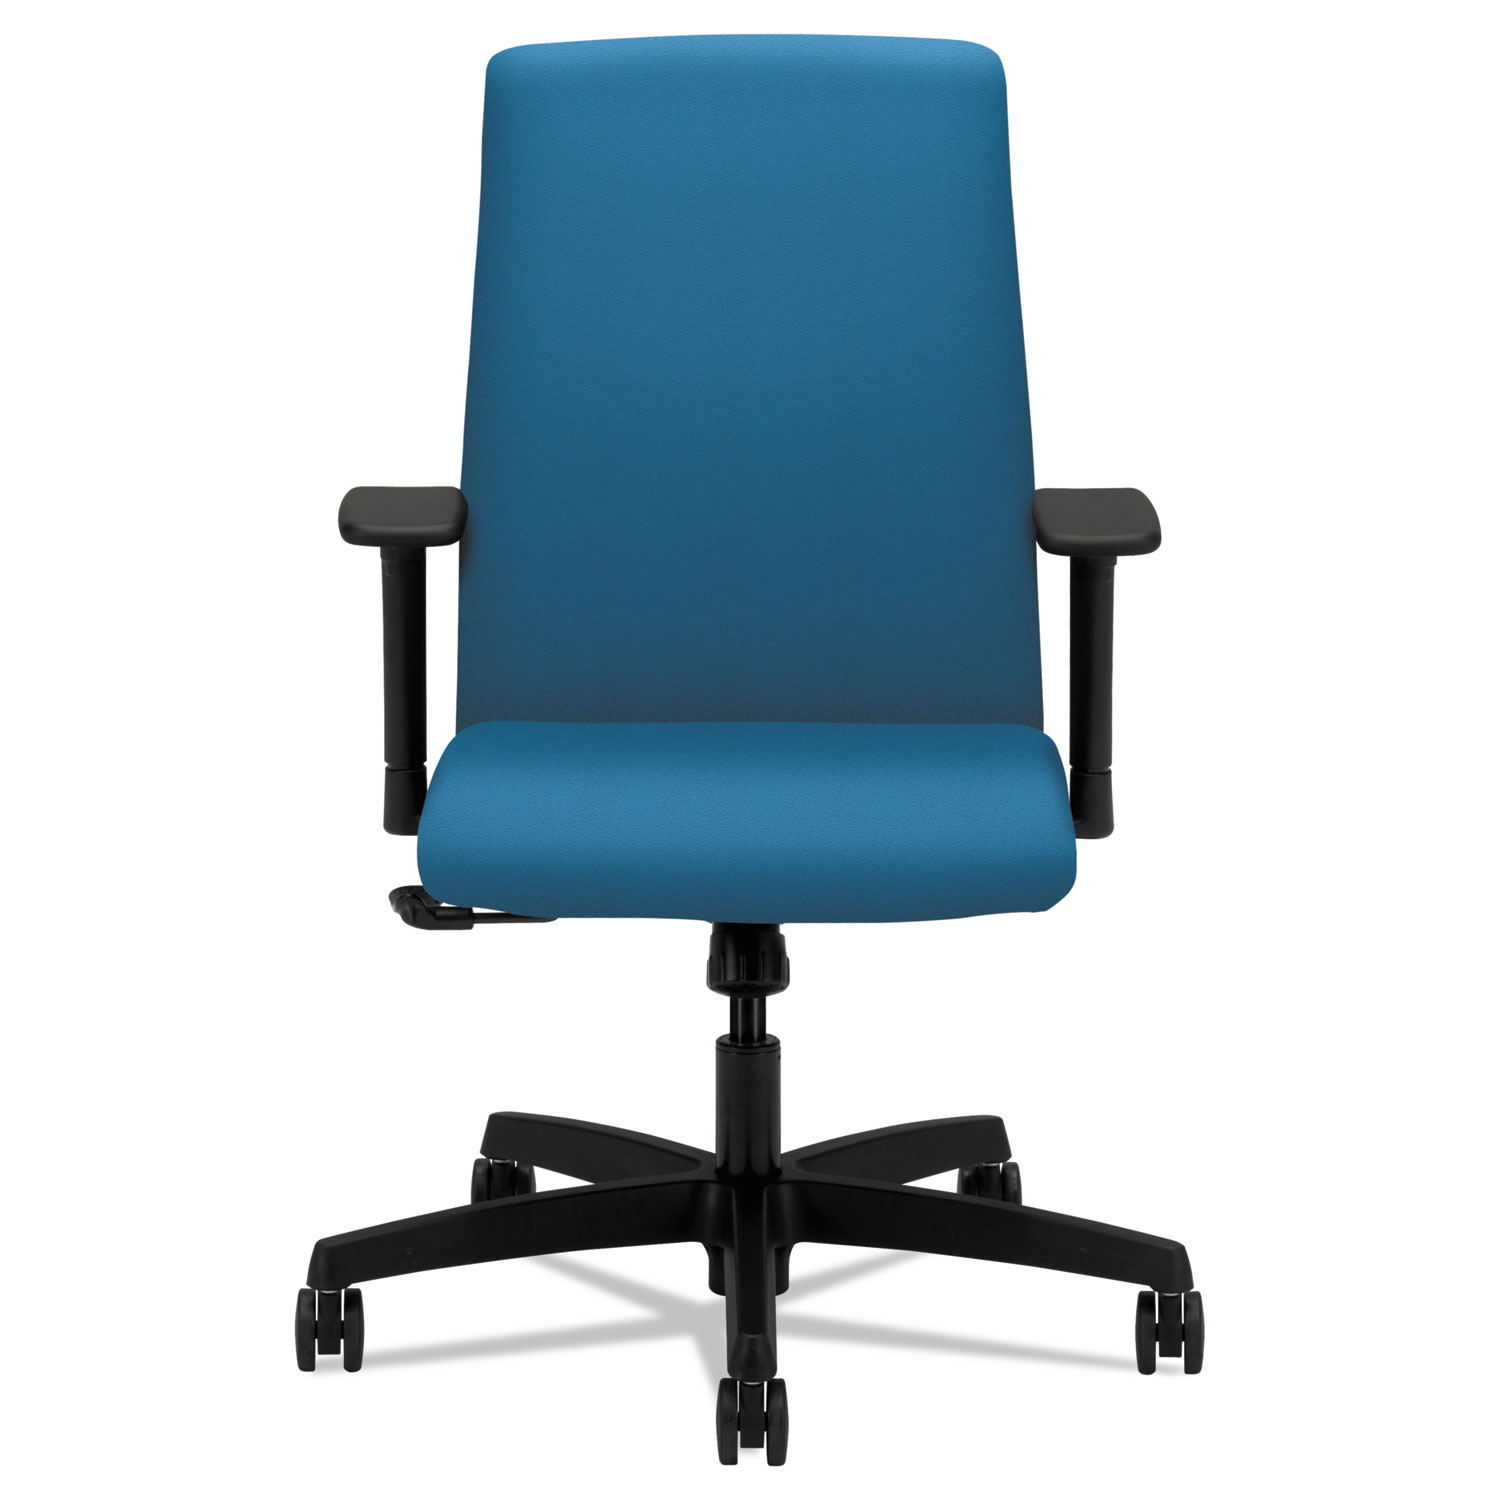  HON HITL1.A.H.U.CU97.T.SB Ignition Series Fabric Low-Back Task Chair, Supports up to 300 lbs., Peacock Seat/Peacock Back, Black Base (HONIT105CU97) 